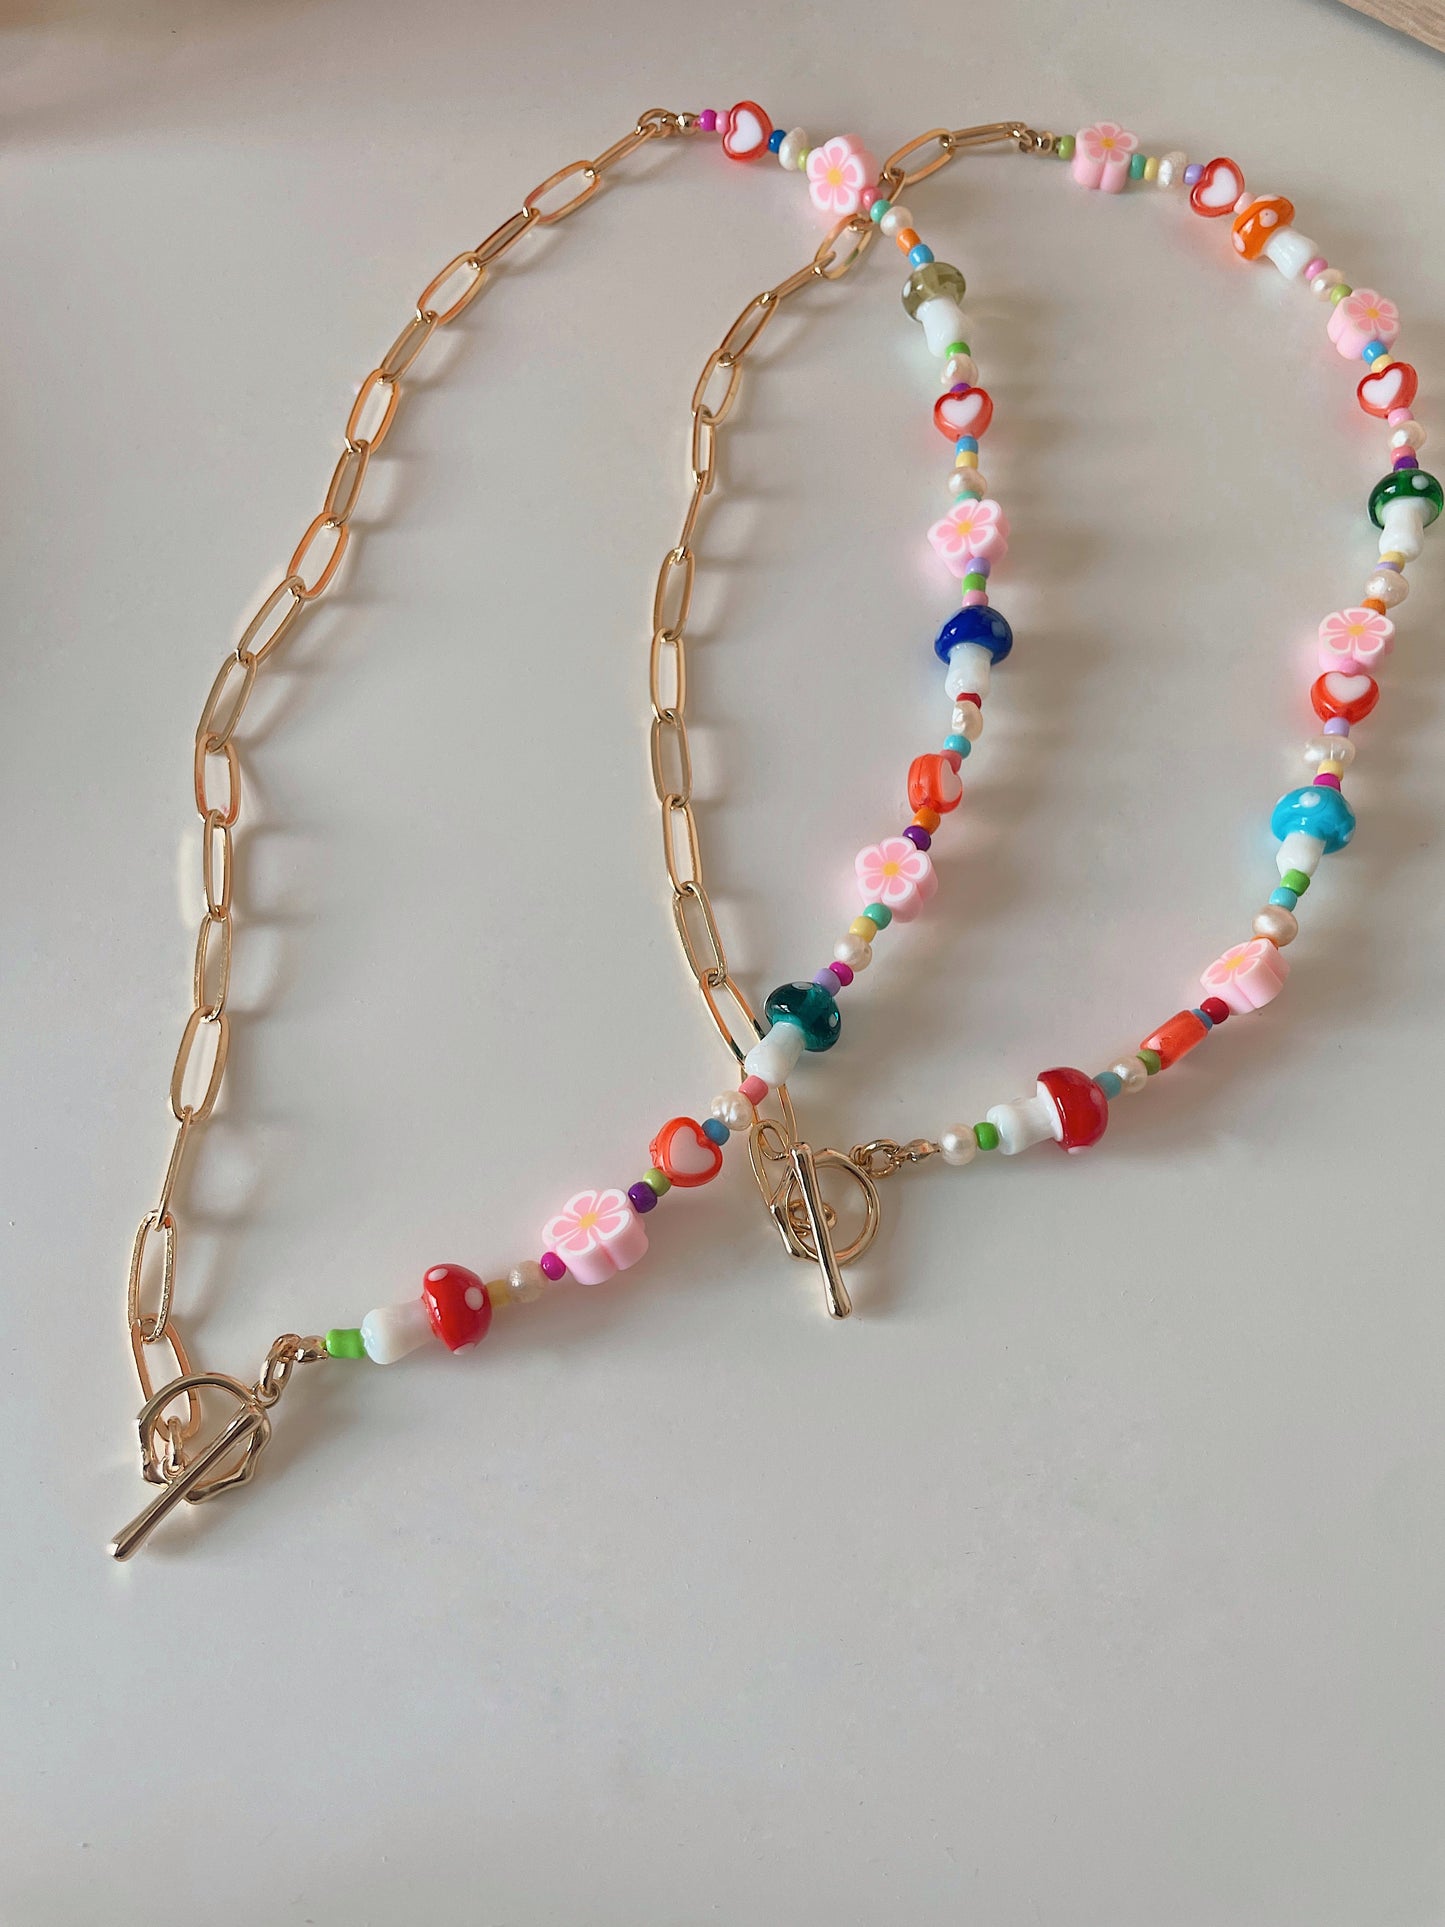 TUTTI FRUTTI - 90s style beaded necklace with 14k gold chain